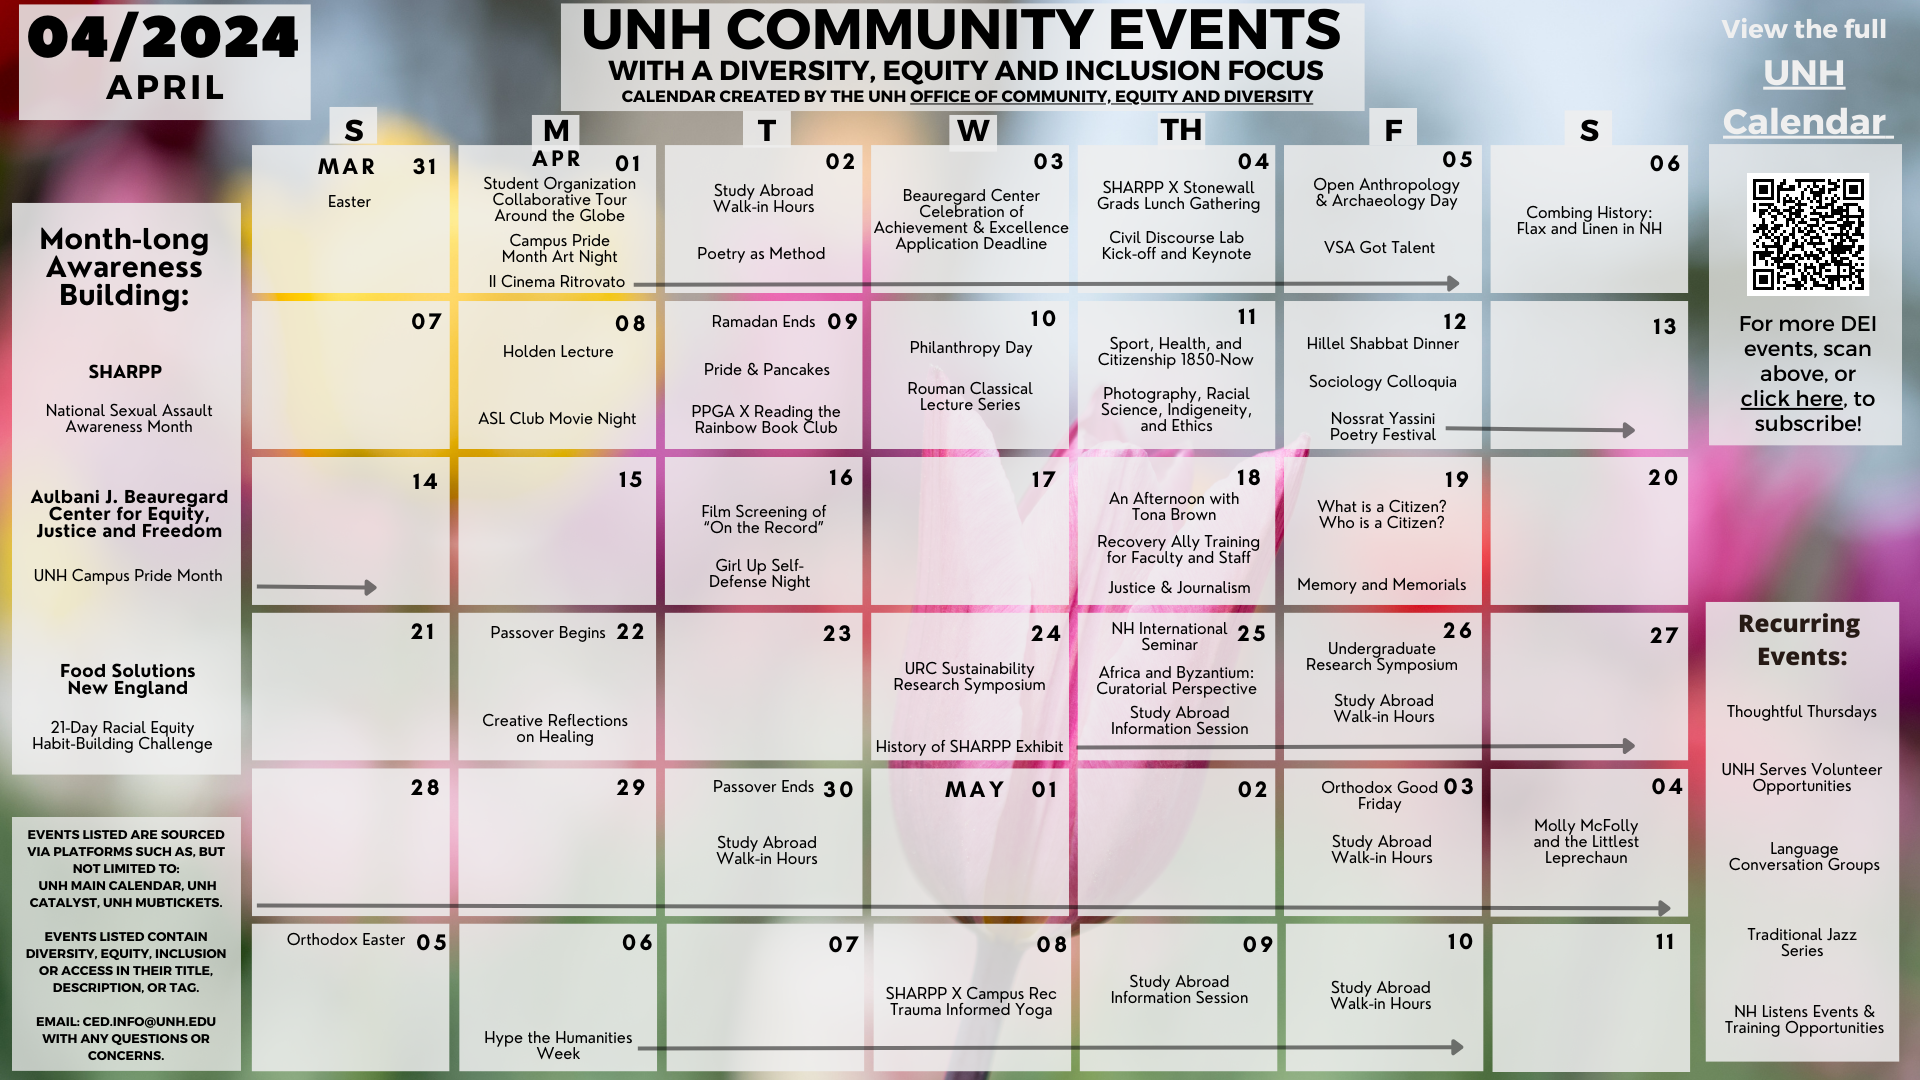 Calendar highlighting events the UNH community is sponsoring related to diversity, equity and inclusion for the month of April 2024..